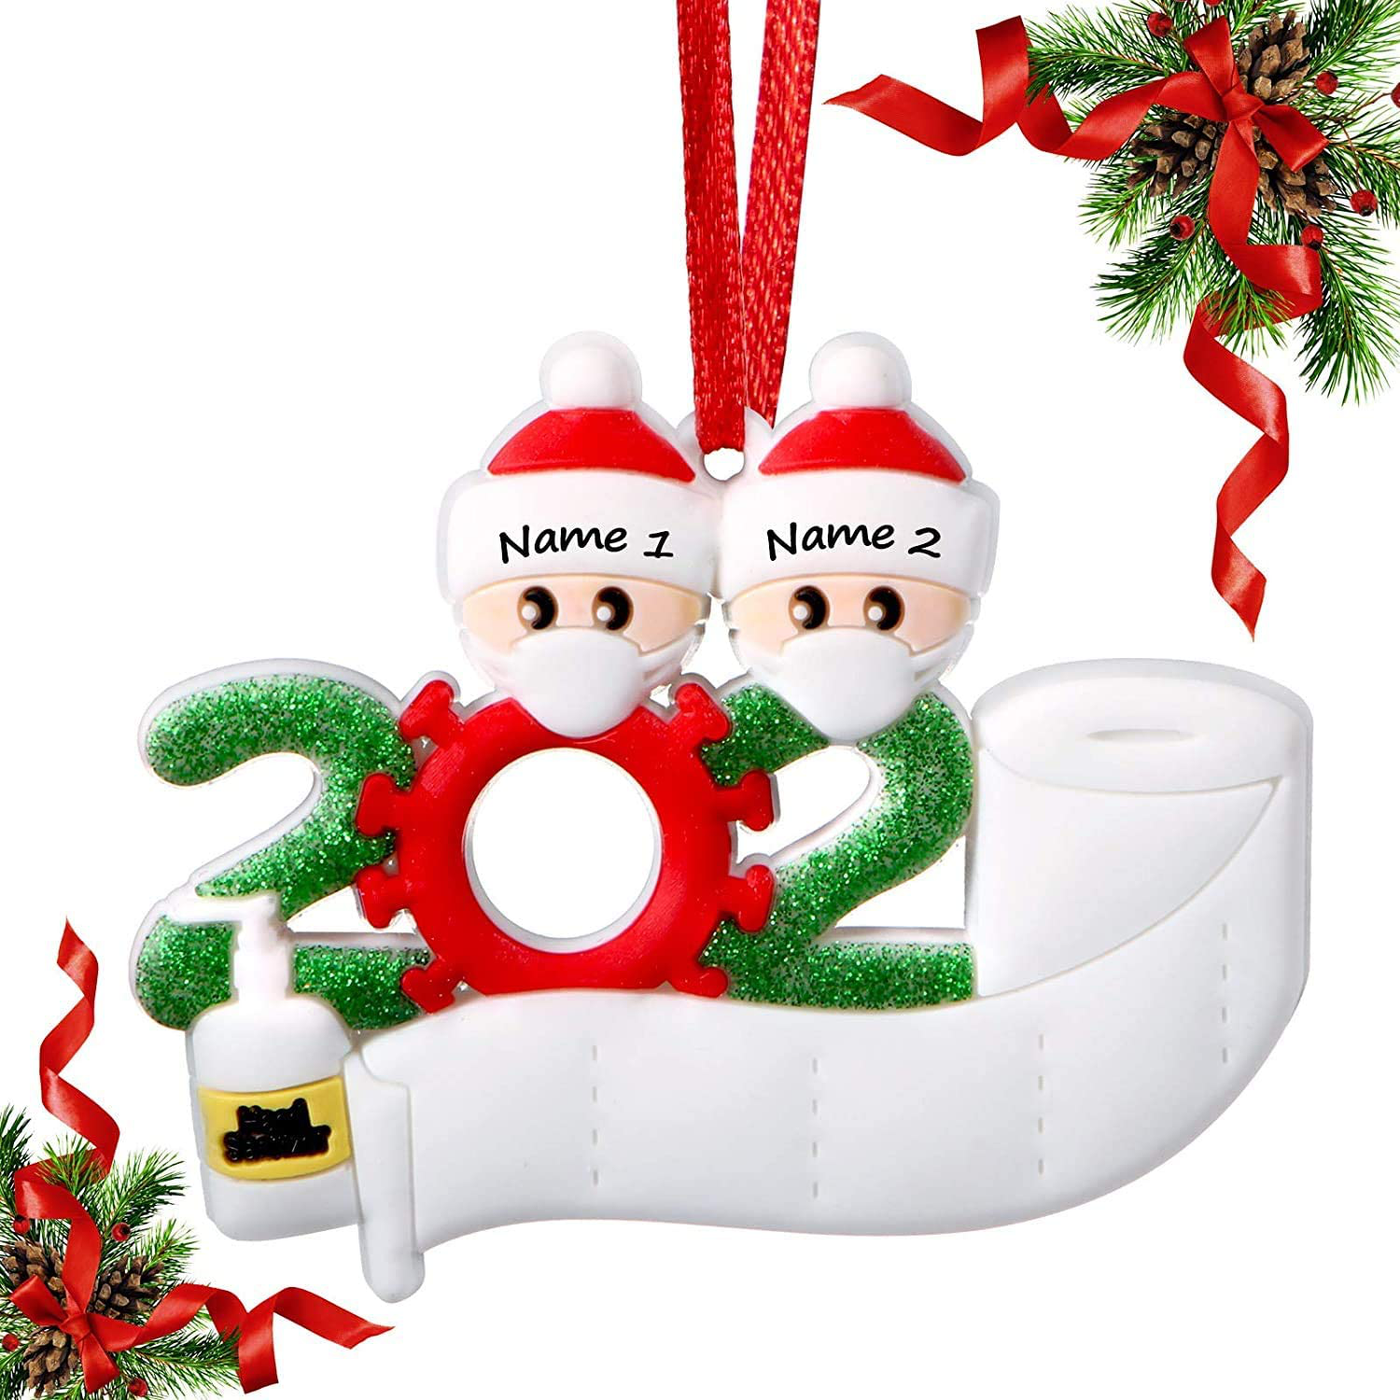 Christmas Ornament Customized to Fit Your Family